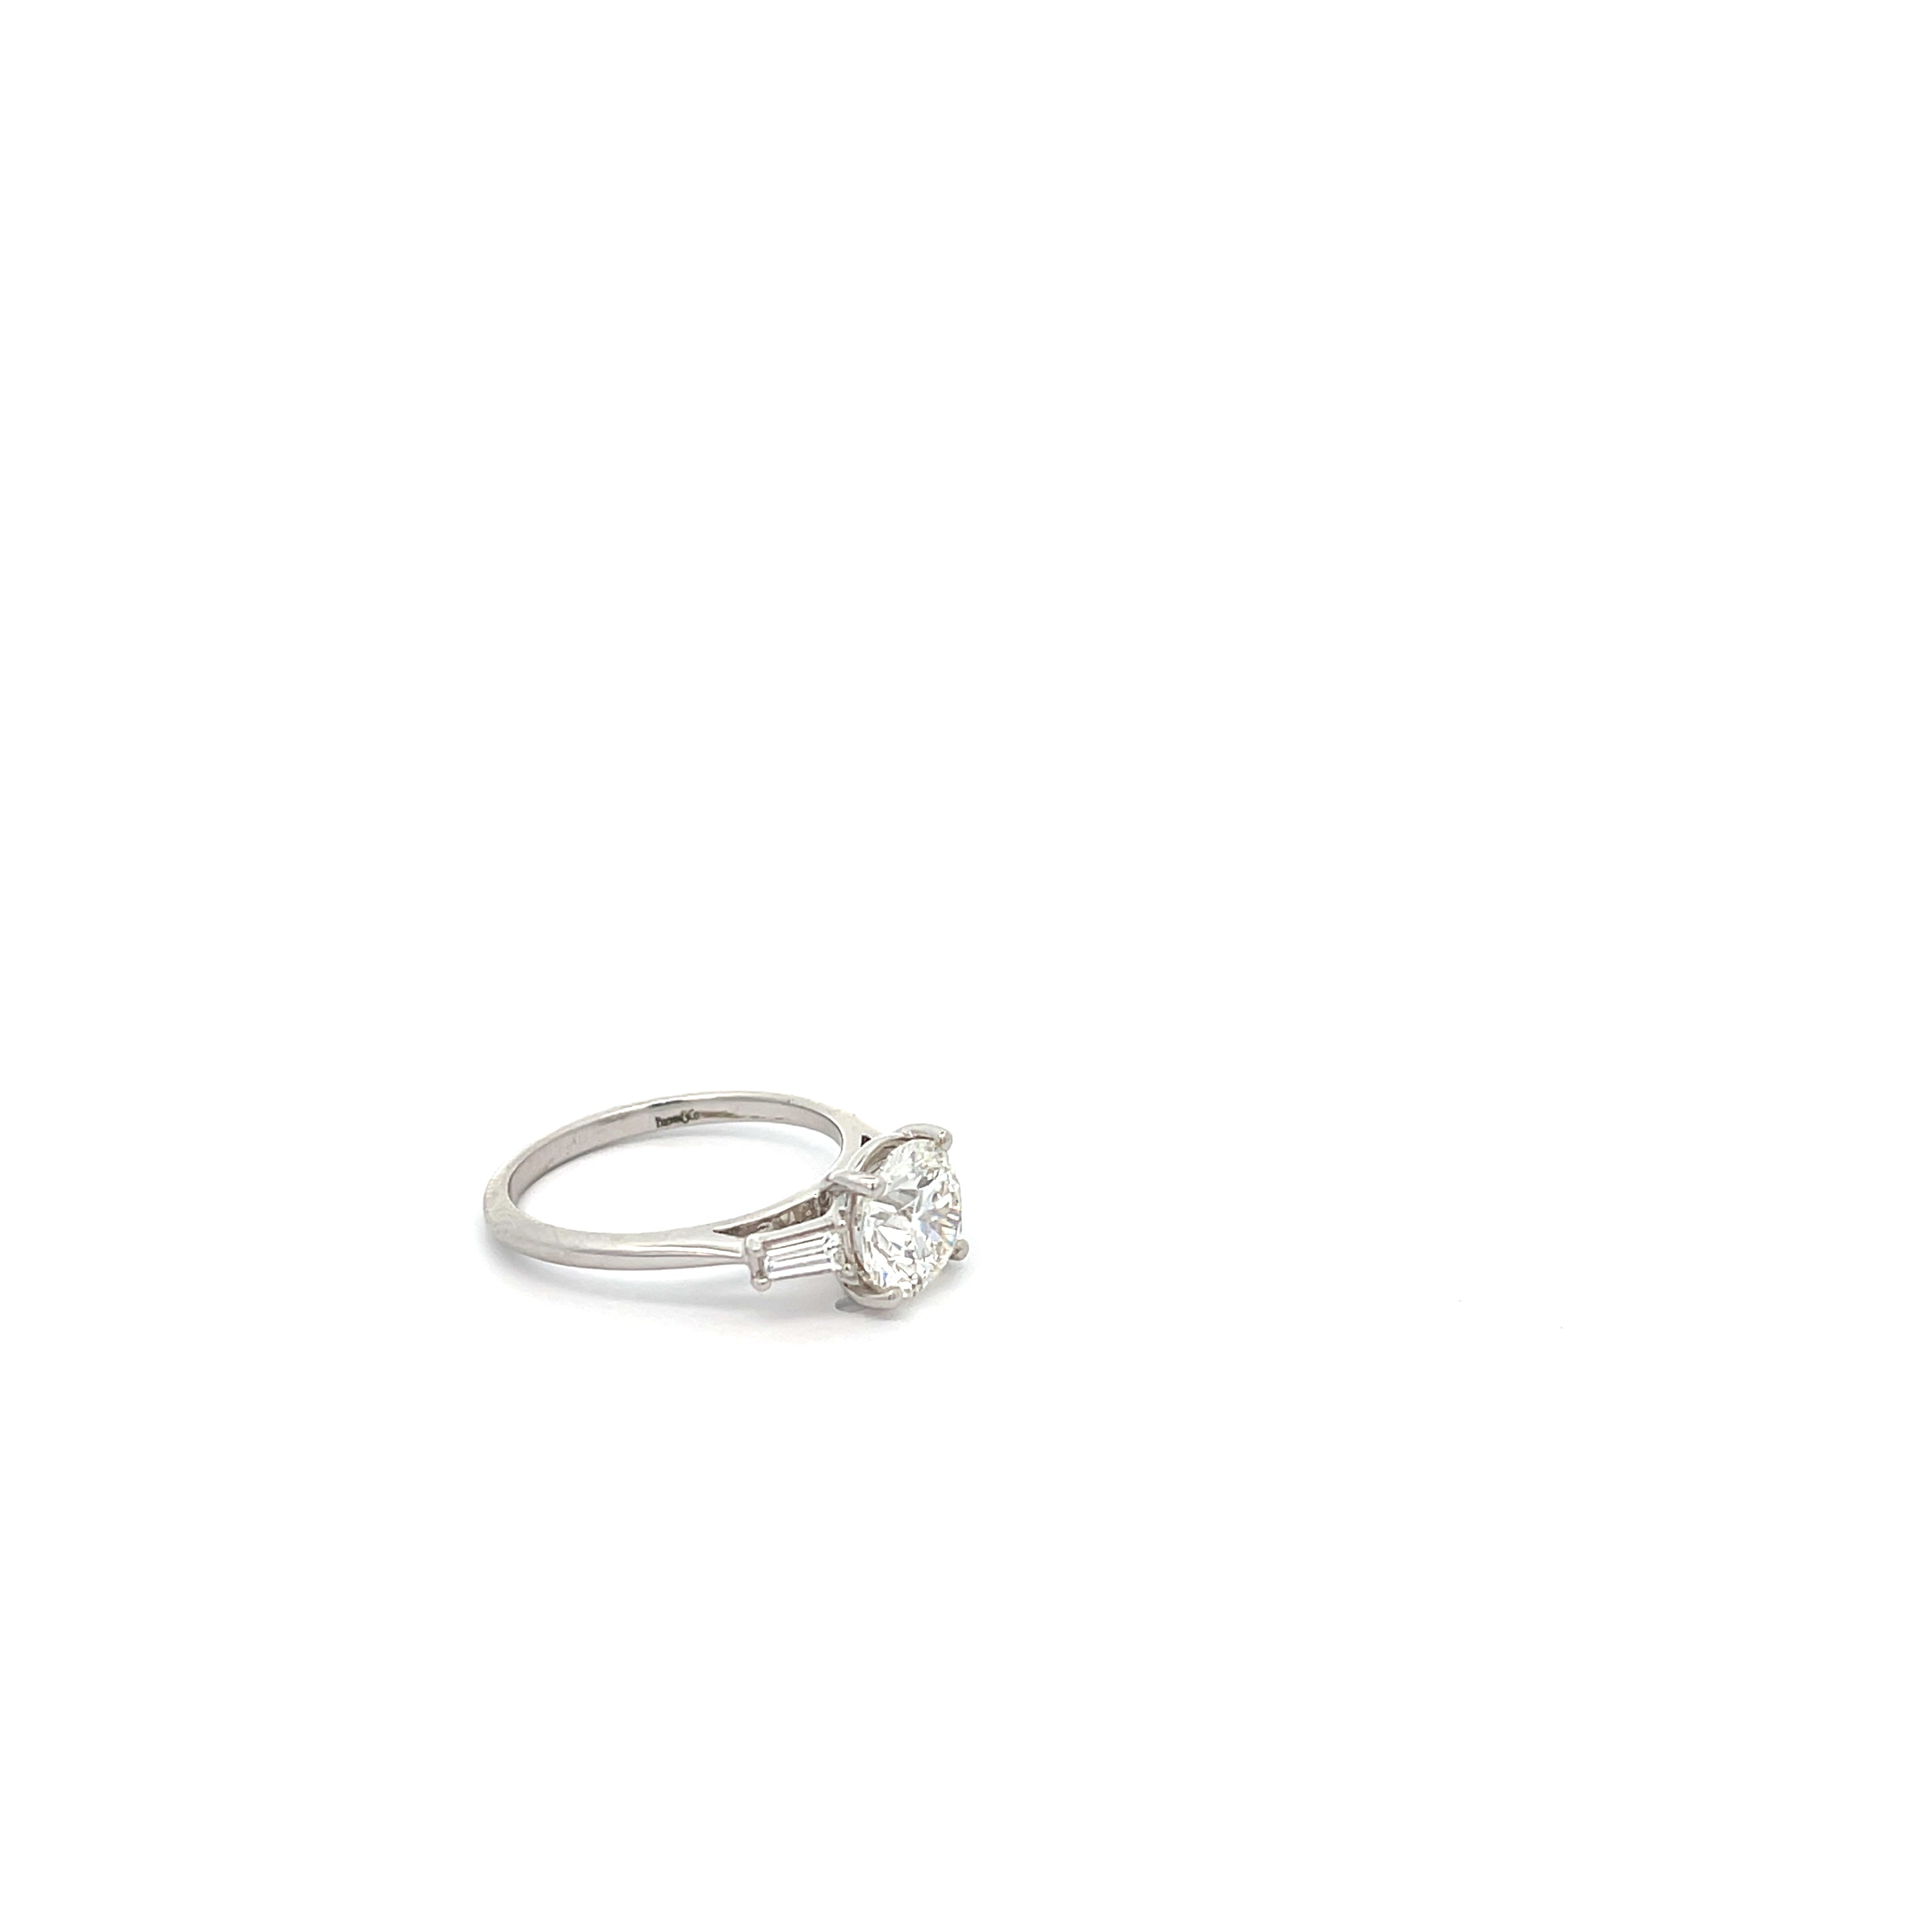 The Classic 3 18k White Gold Round Engagement Ring with Baguette Side Stones